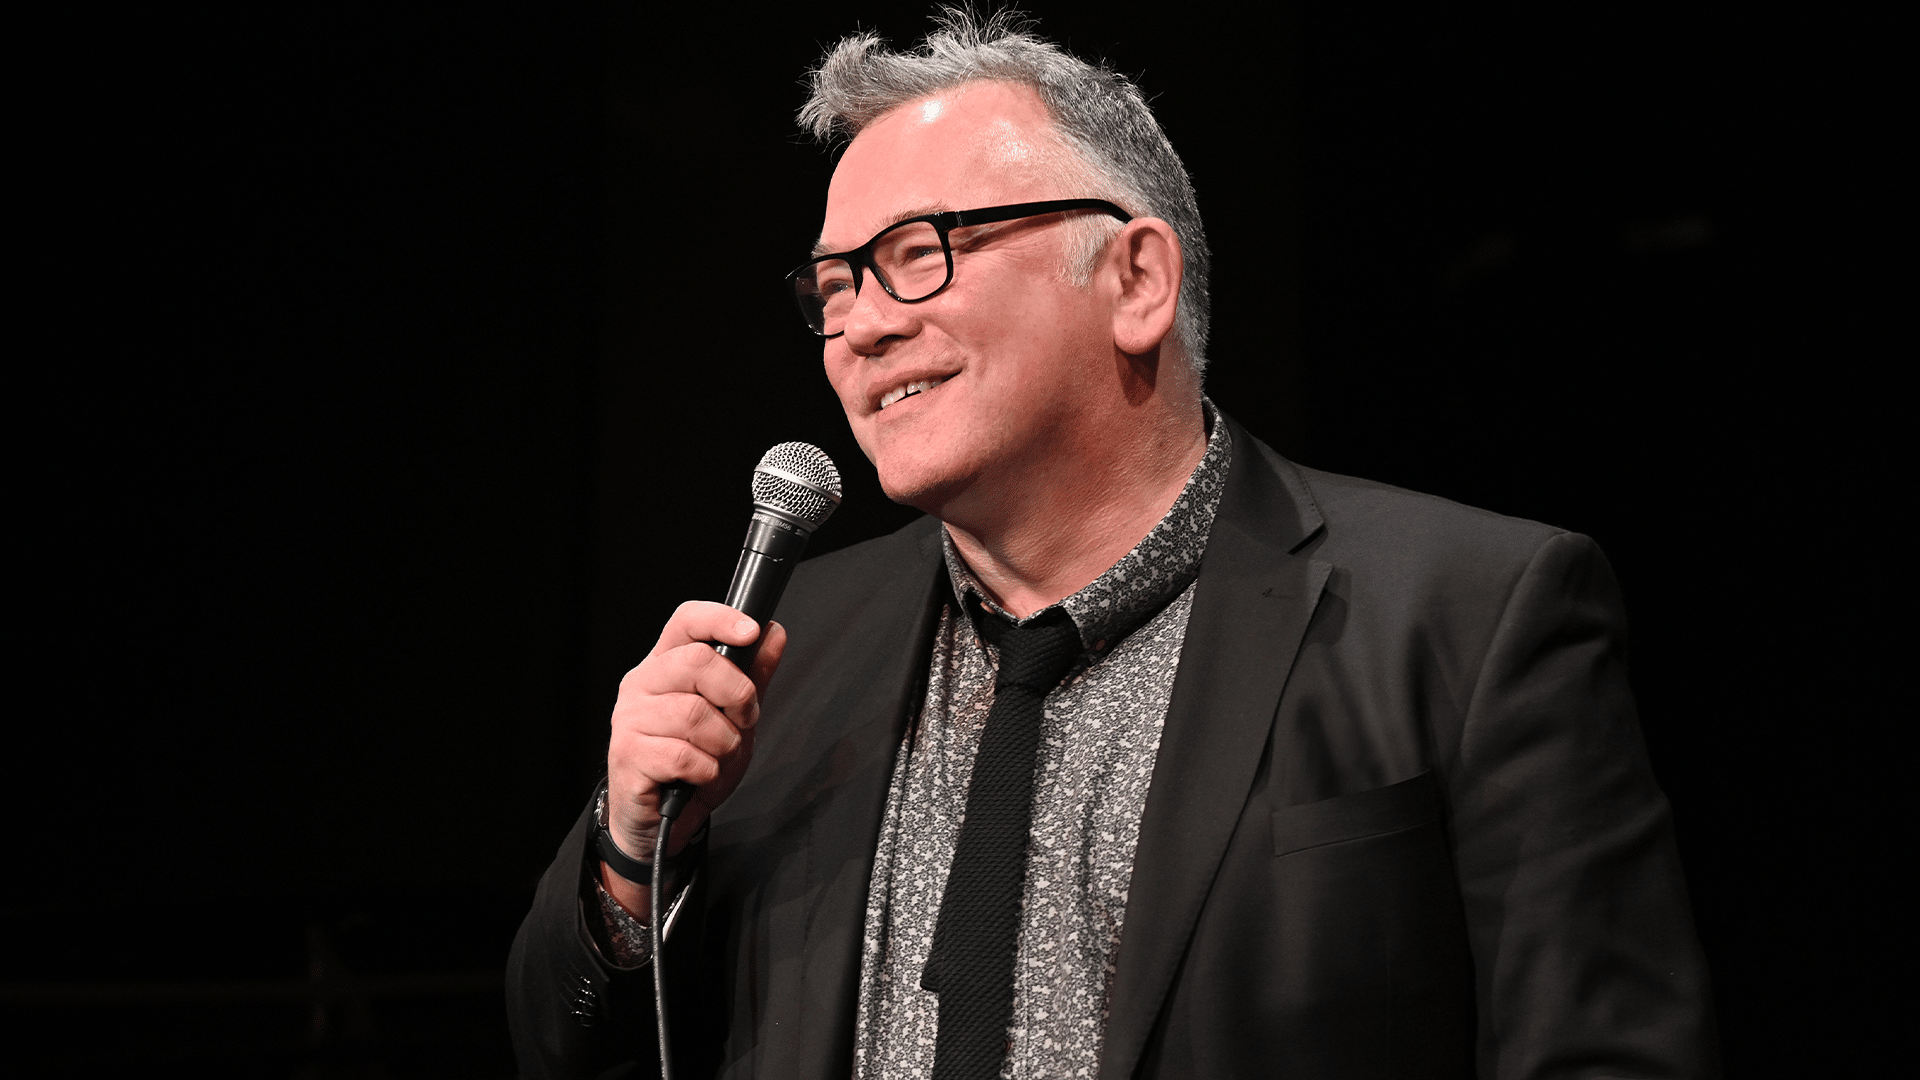 Stewart Lee wearing a black suit, holding a microphone and smiling